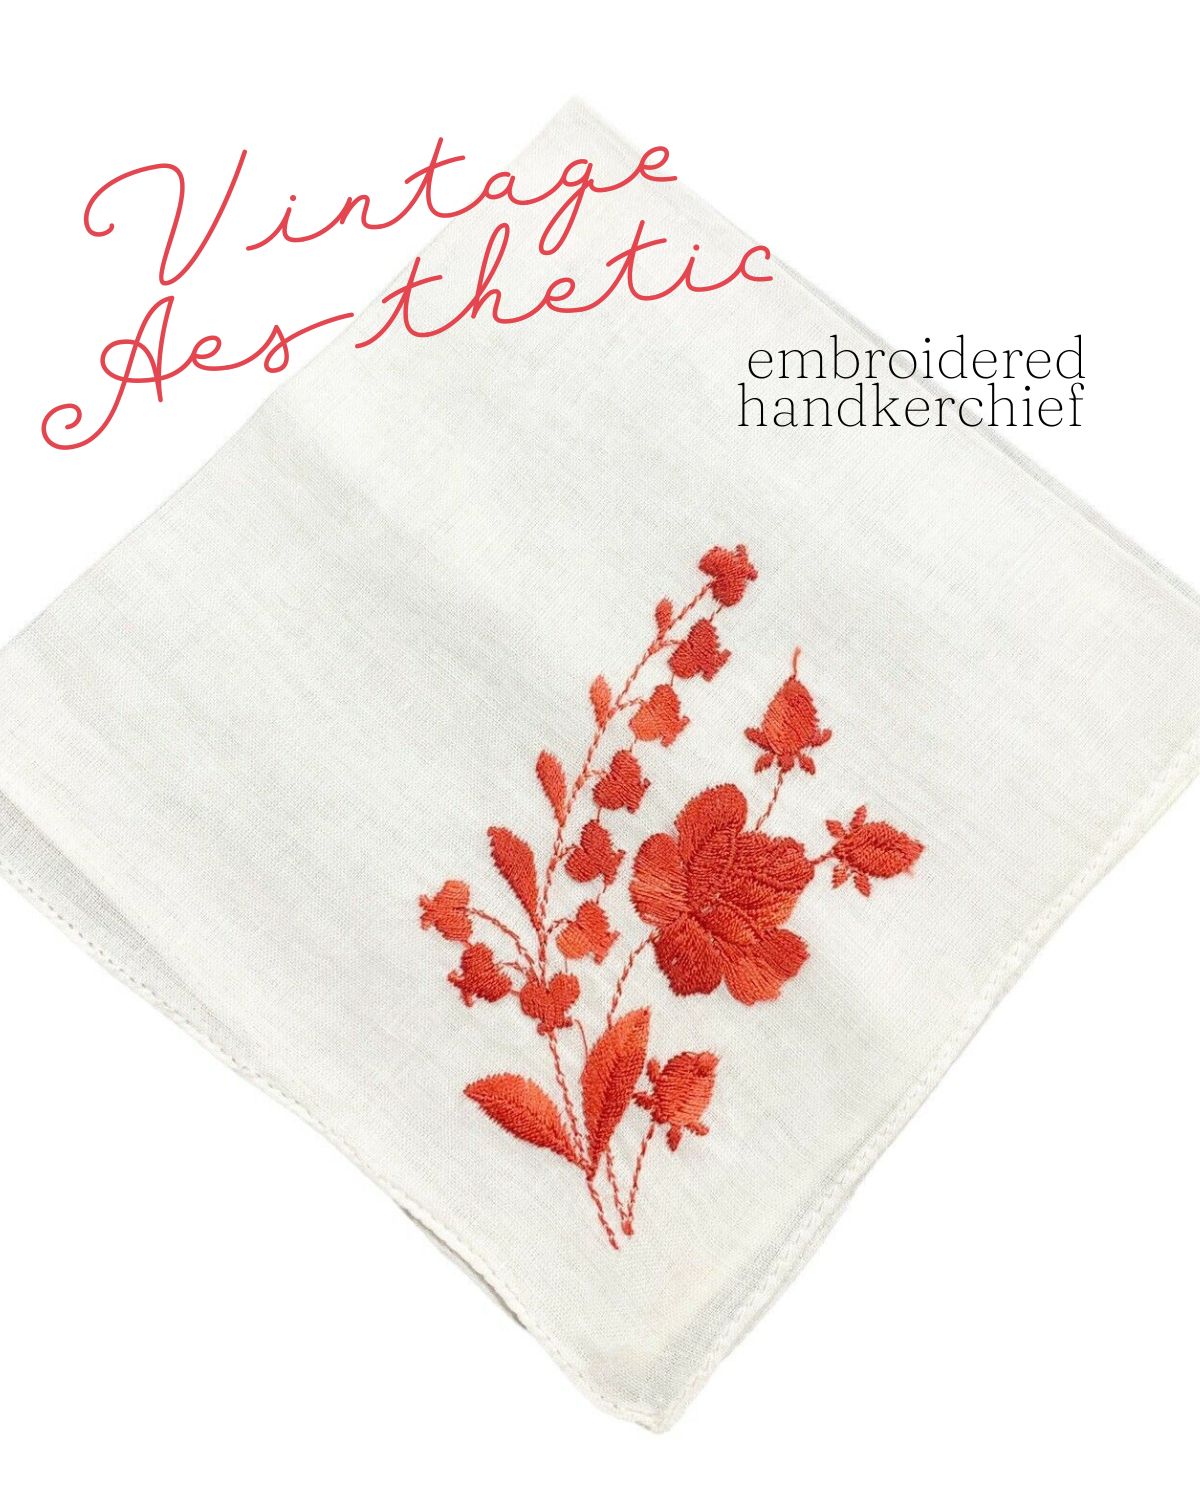 A white handkerchief with a red rose on it 